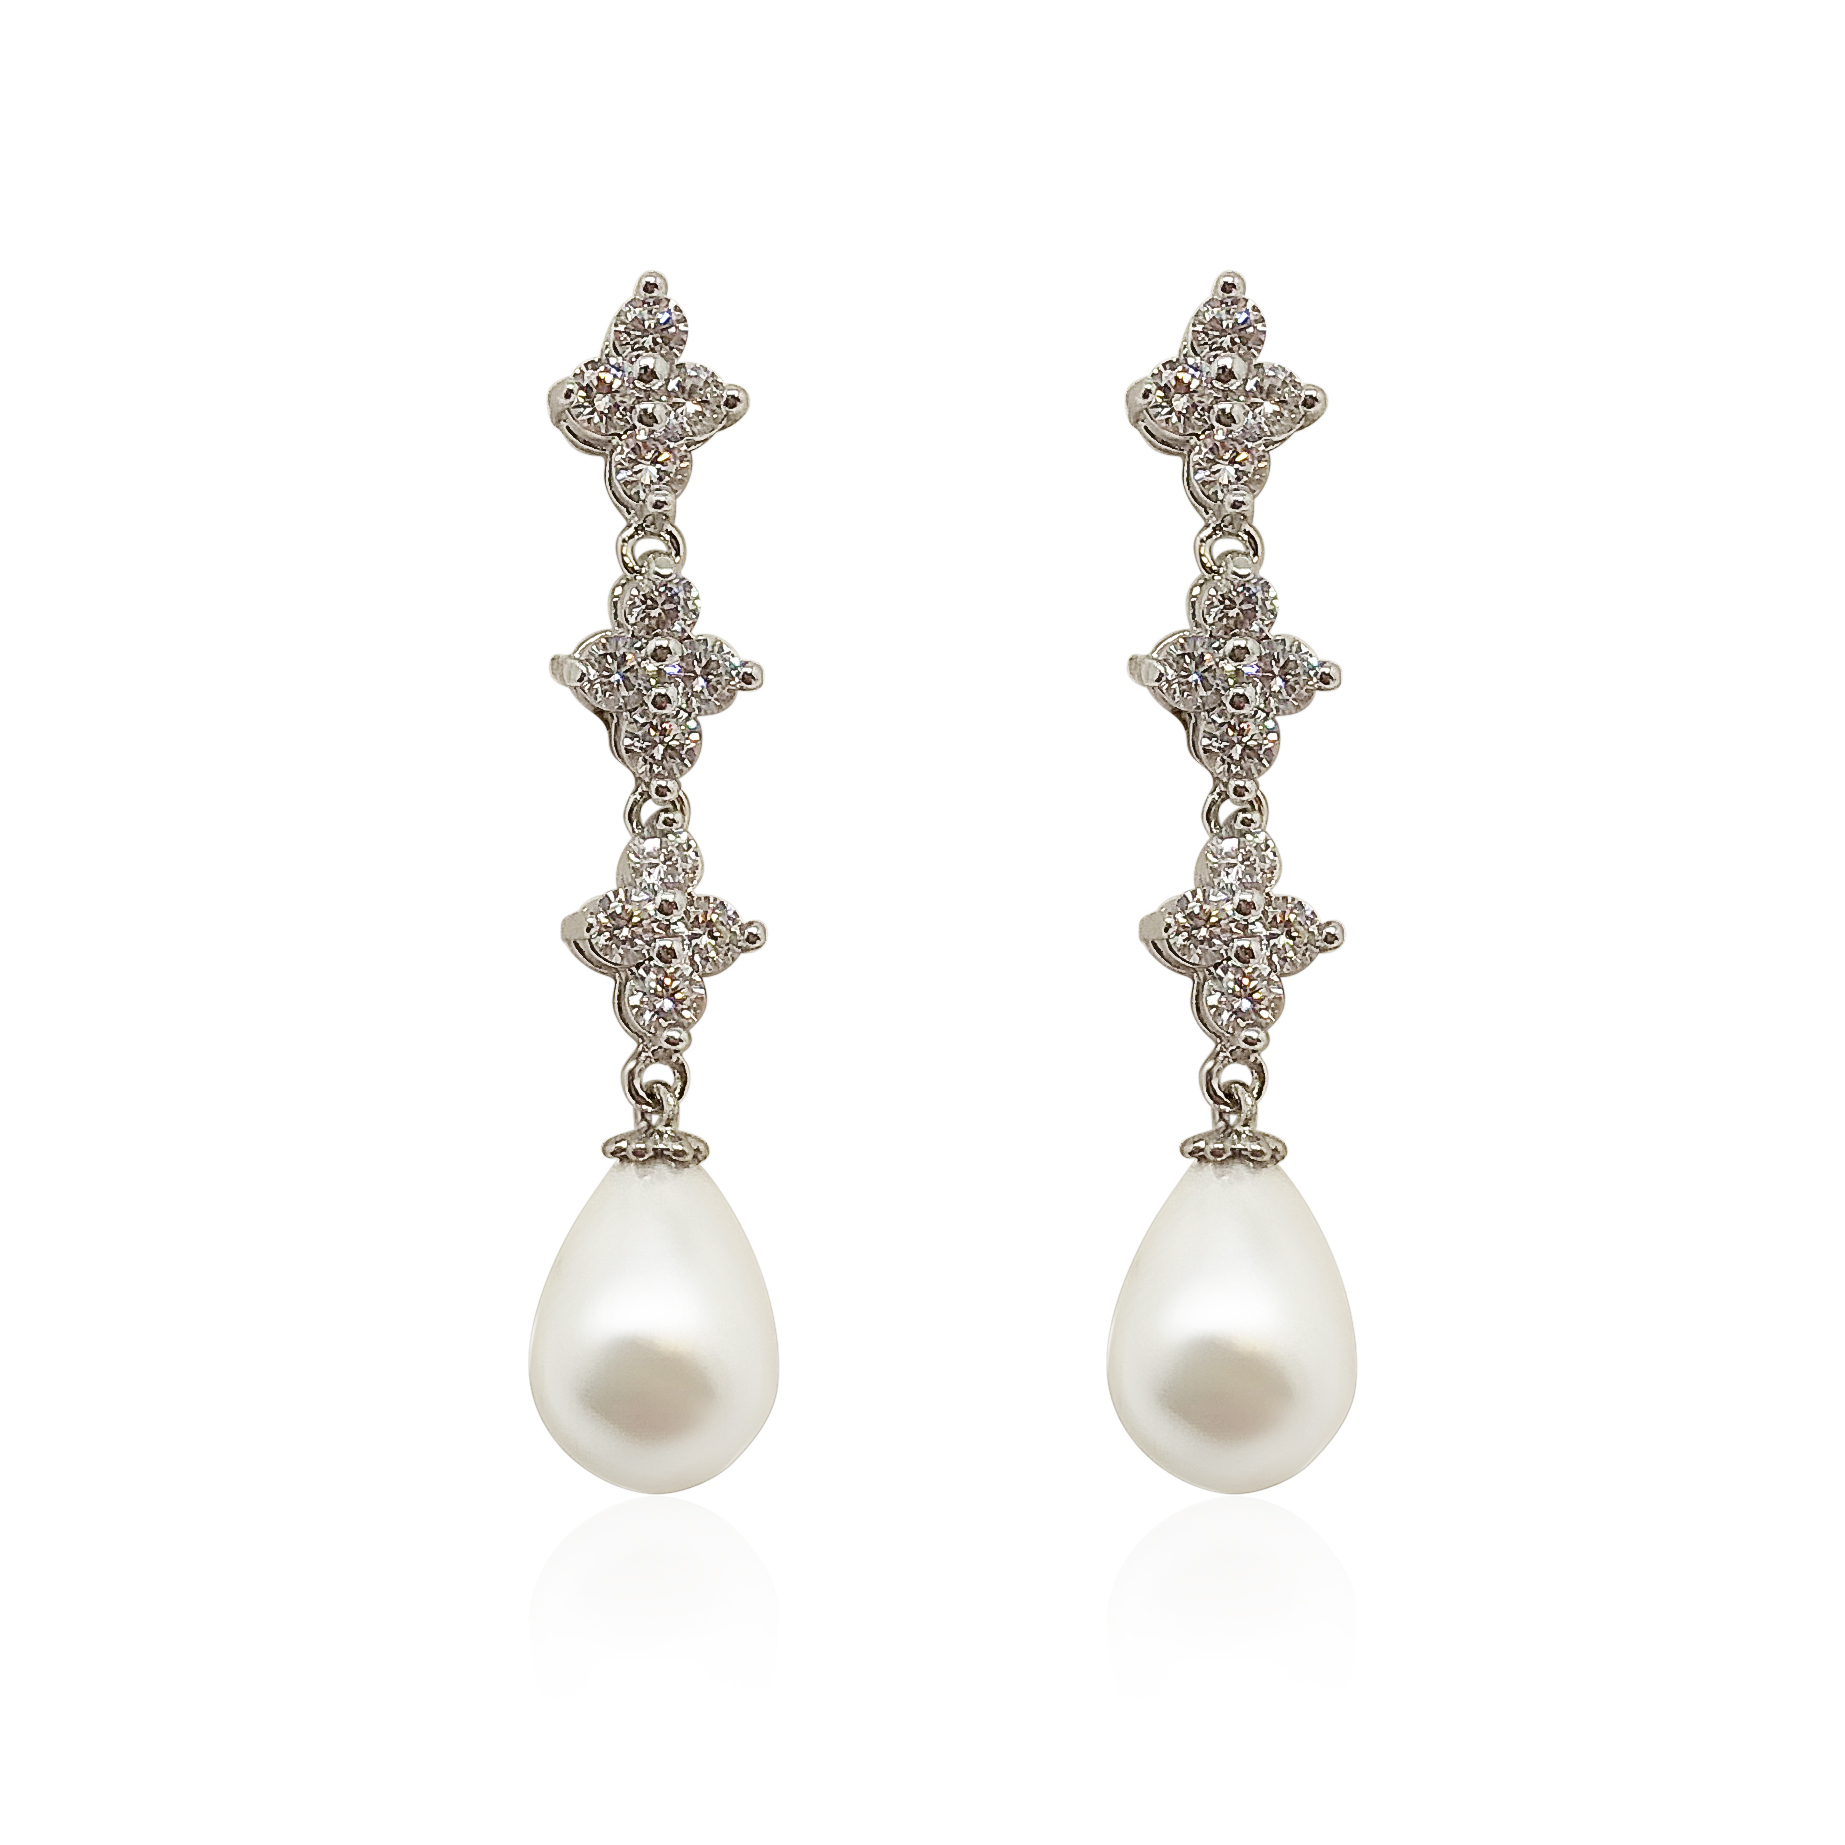 Pearl And Crystal Drop Earrings|Cailyn|Jeanette Maree